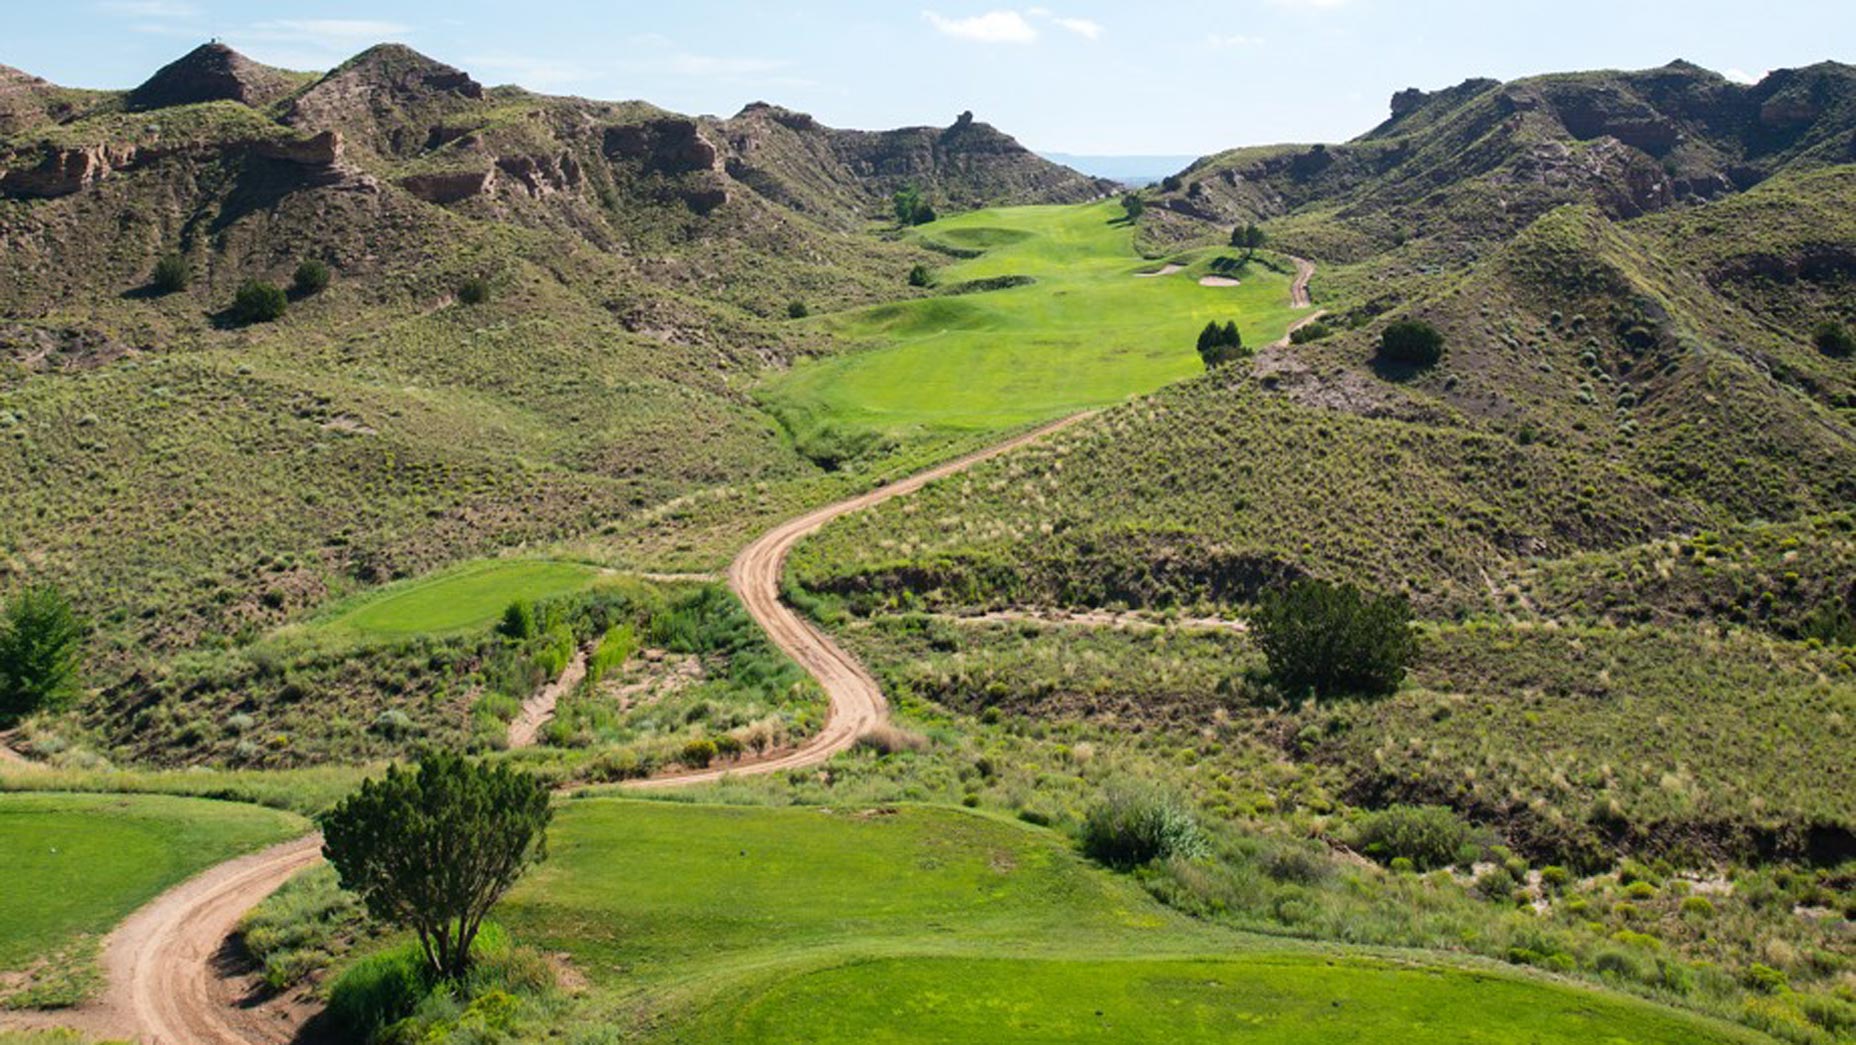 Best golf courses in New Mexico, according to GOLF Magazine’s expert course raters